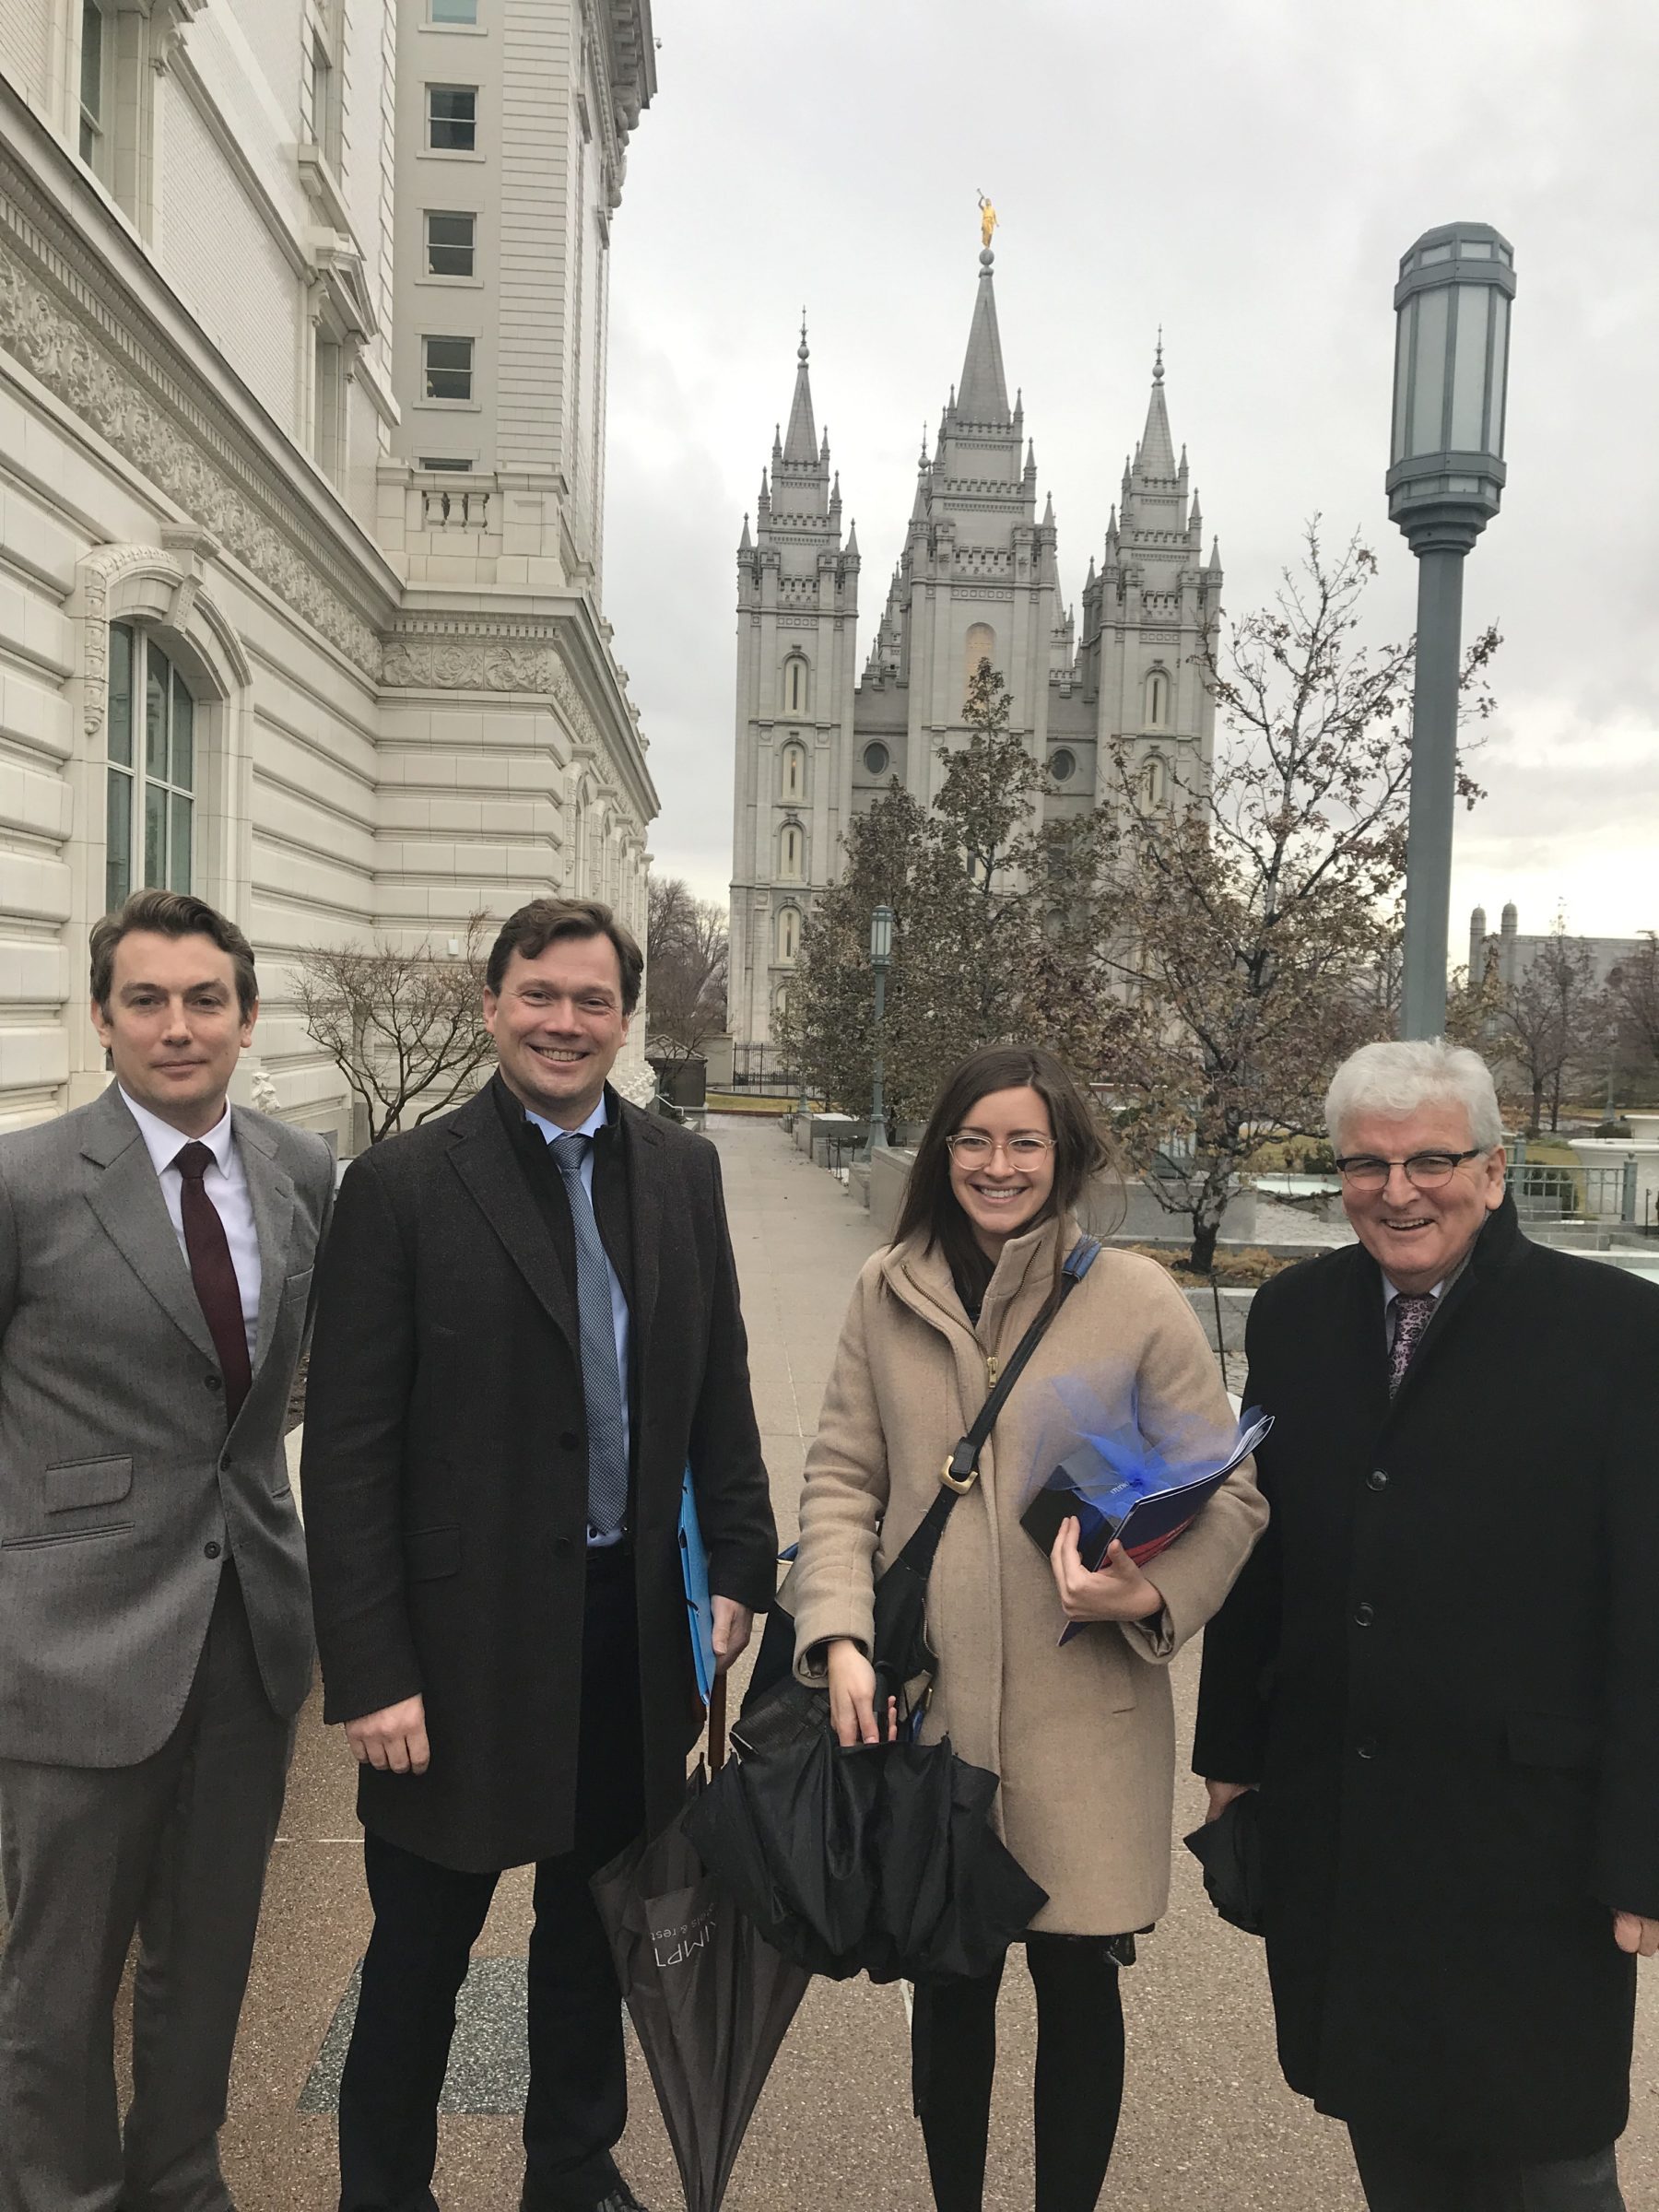 The team takes a stroll through Temple Square in downtown Salt Lake City, Utah 